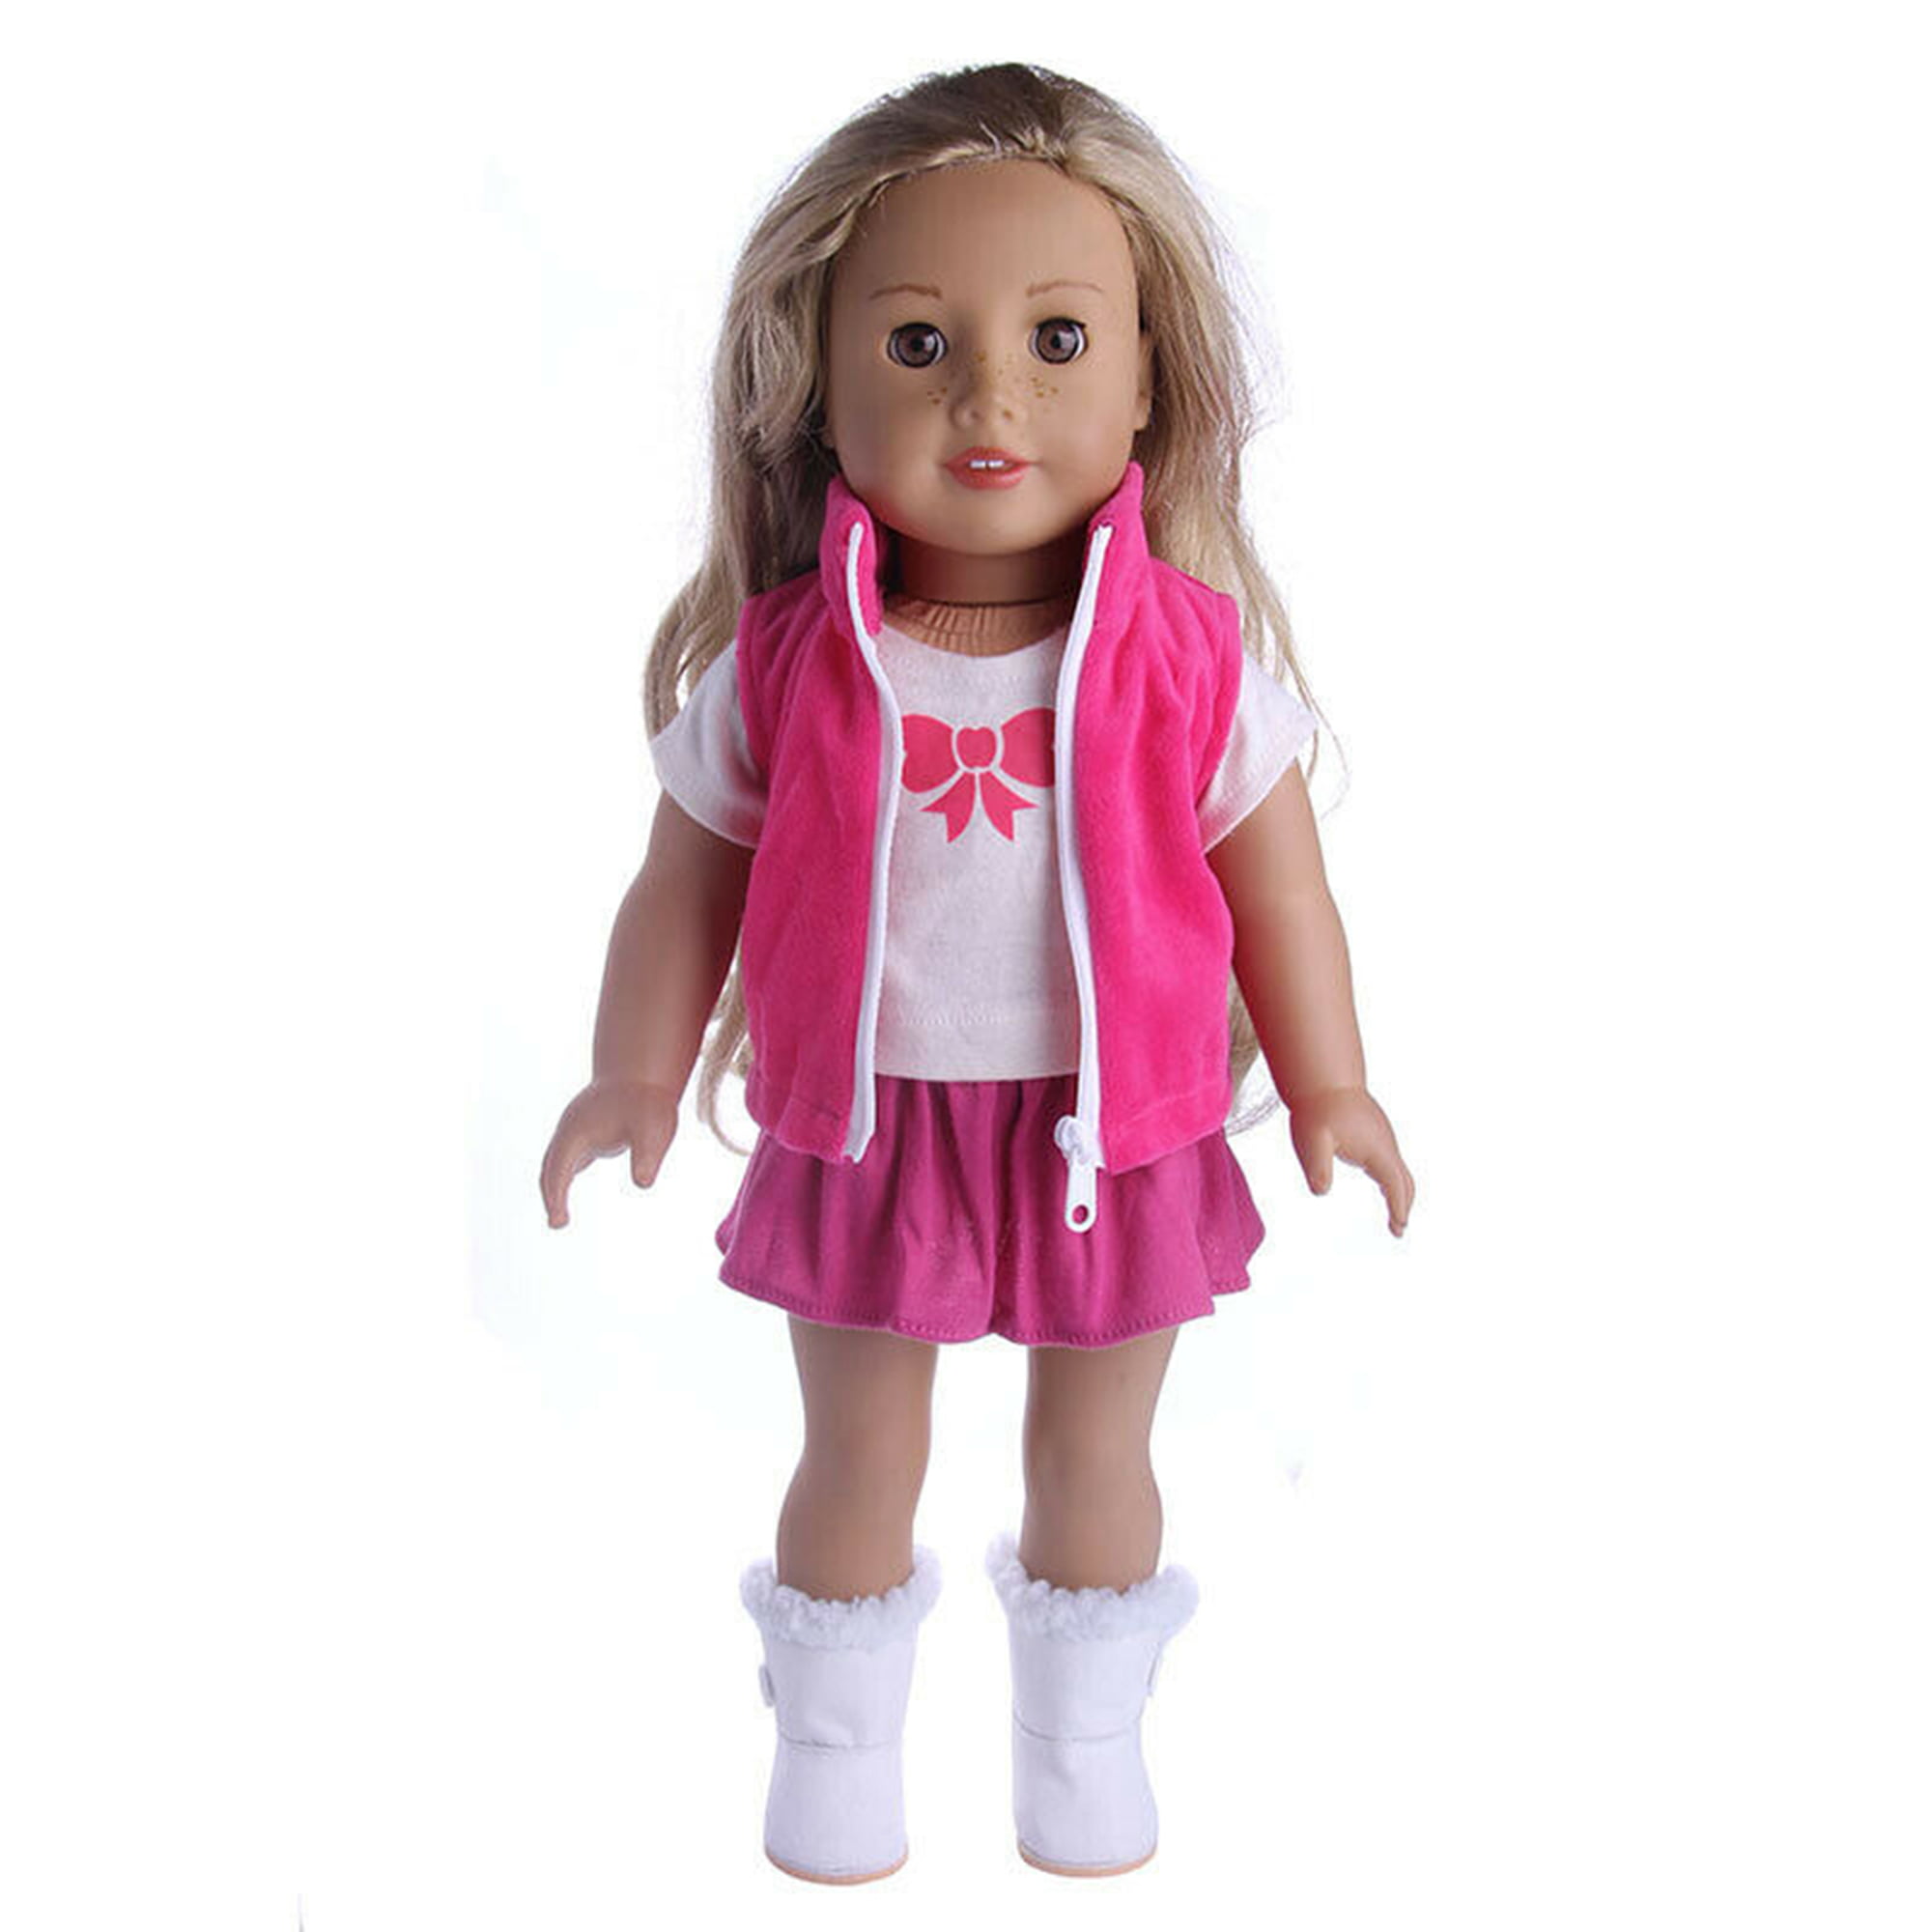 Doll Outfit Set For 18 Inch Clothes For Baby Doll Accessory Baby Girl Gifts 